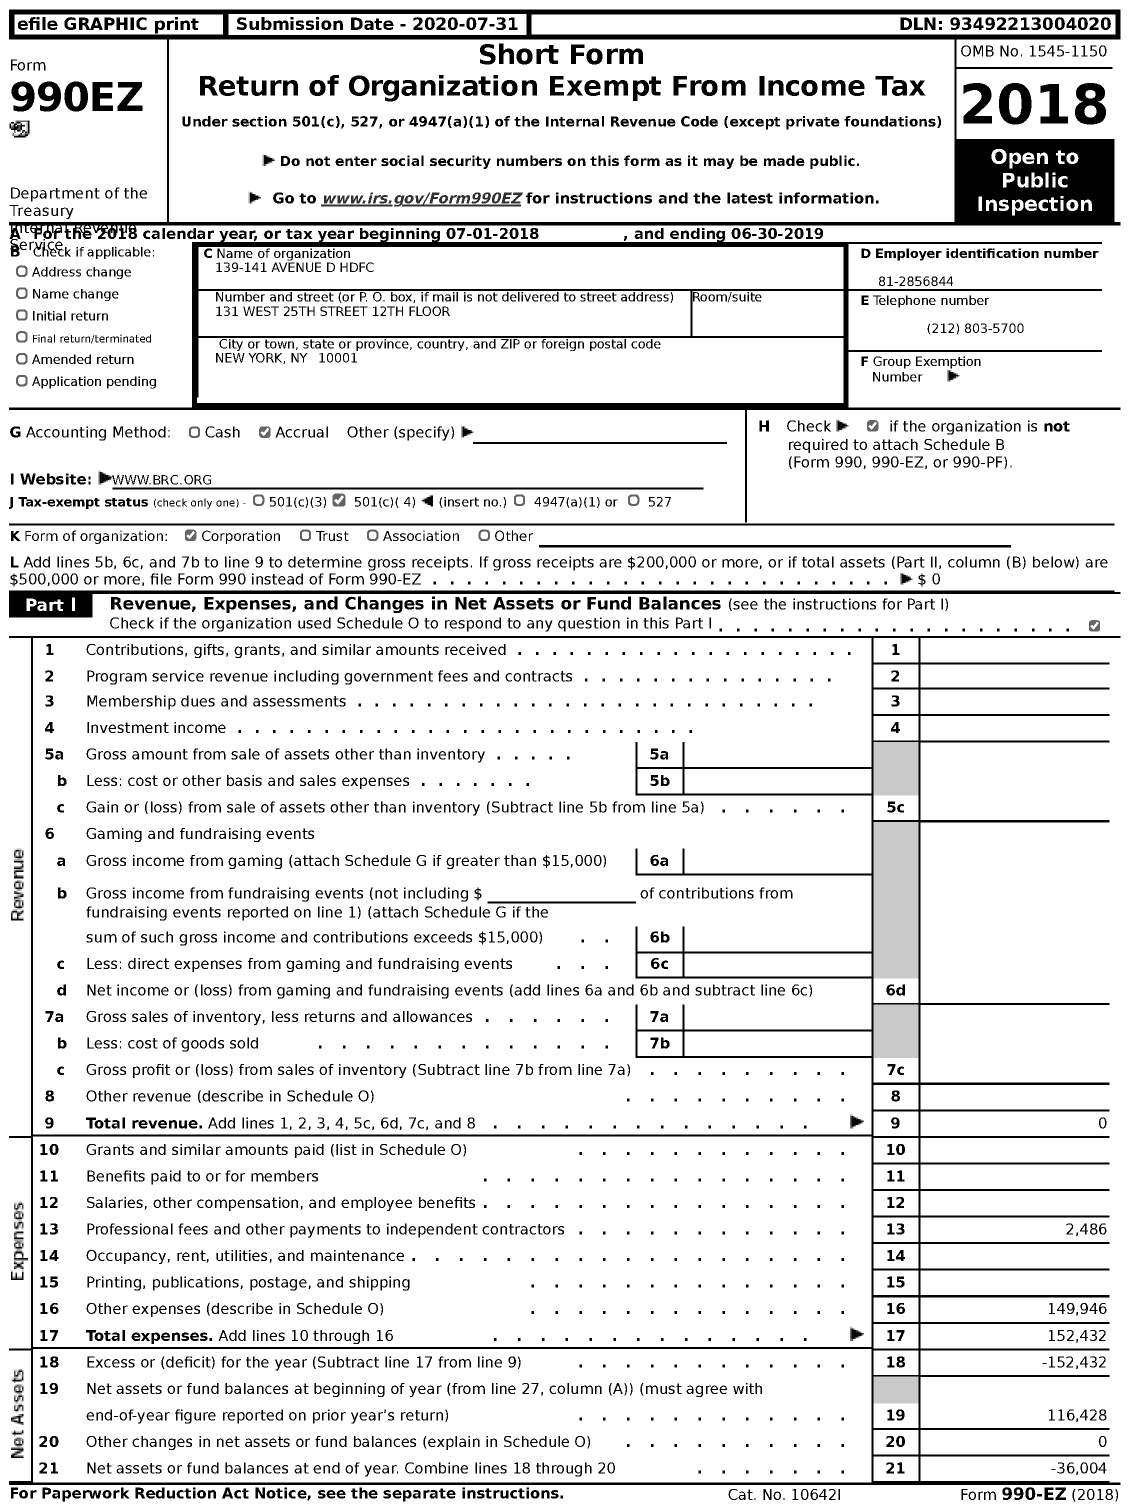 Image of first page of 2018 Form 990EZ for 139-141 Avenue D HDFC